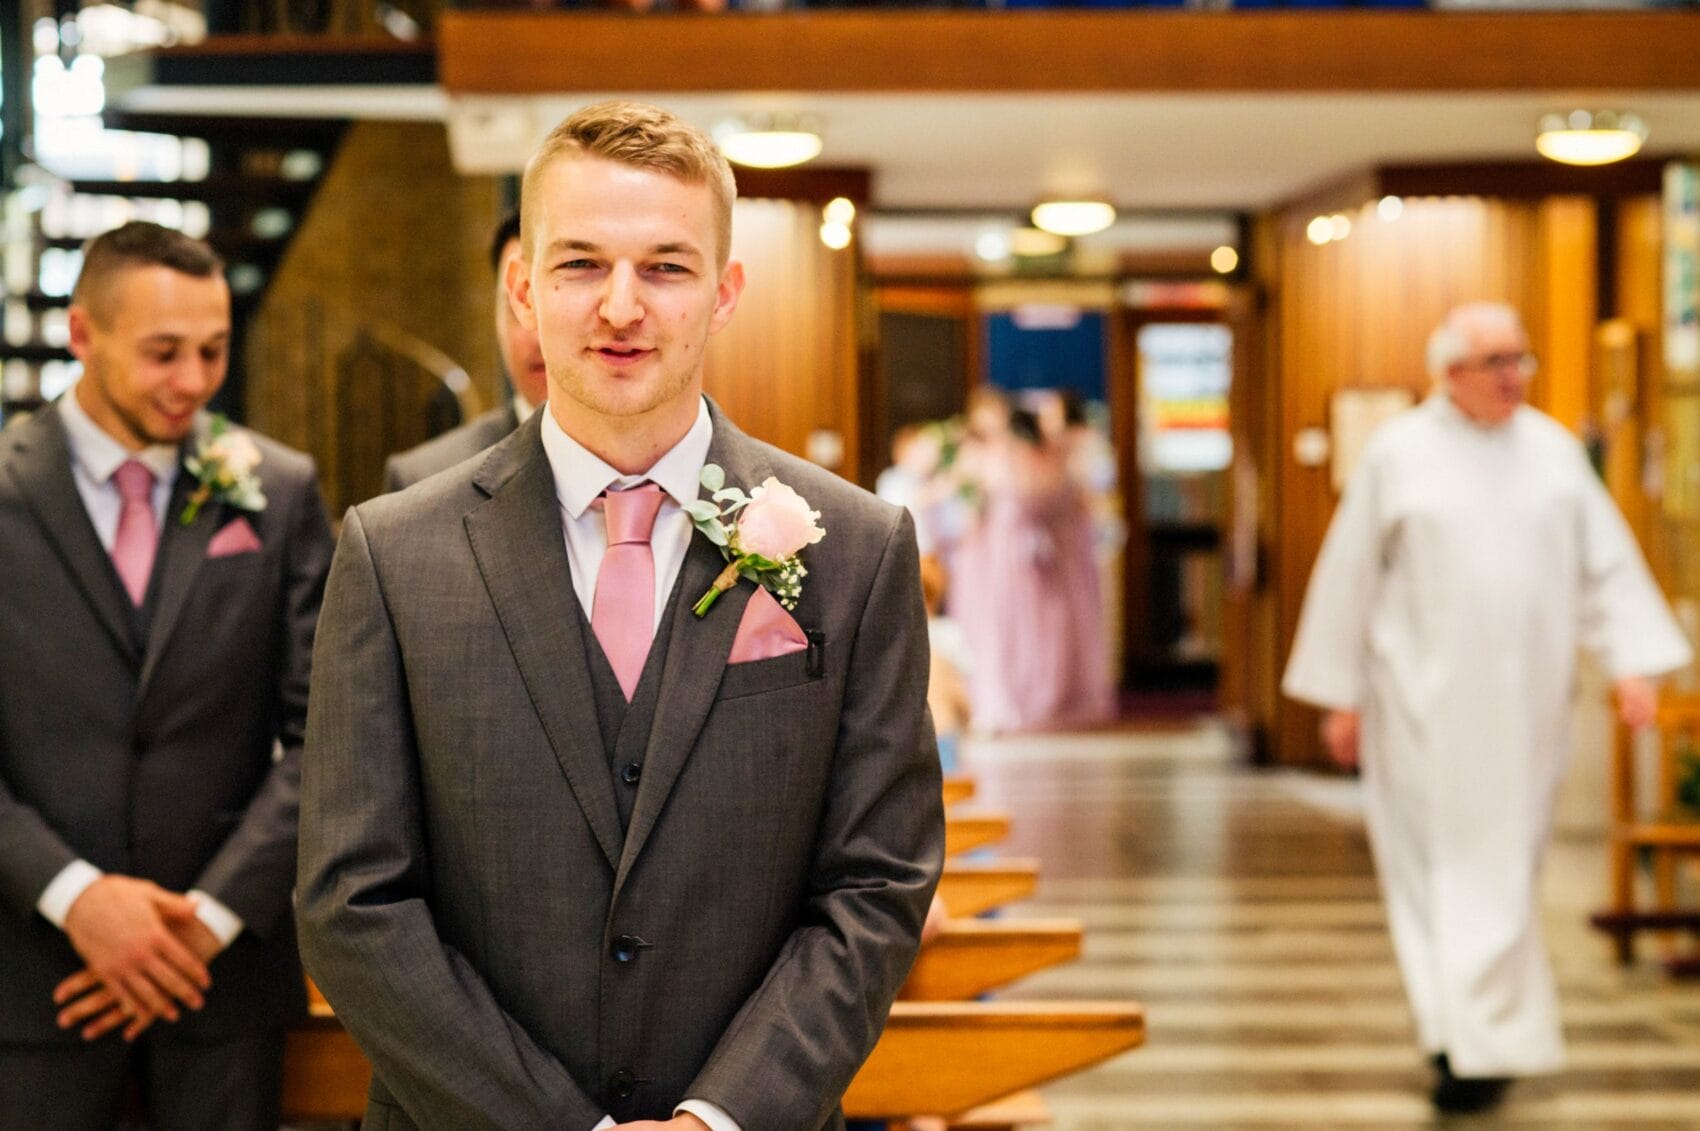 Groom, Ben, smiles at the bridemaids wait in the background of St Mary's Catholic Church